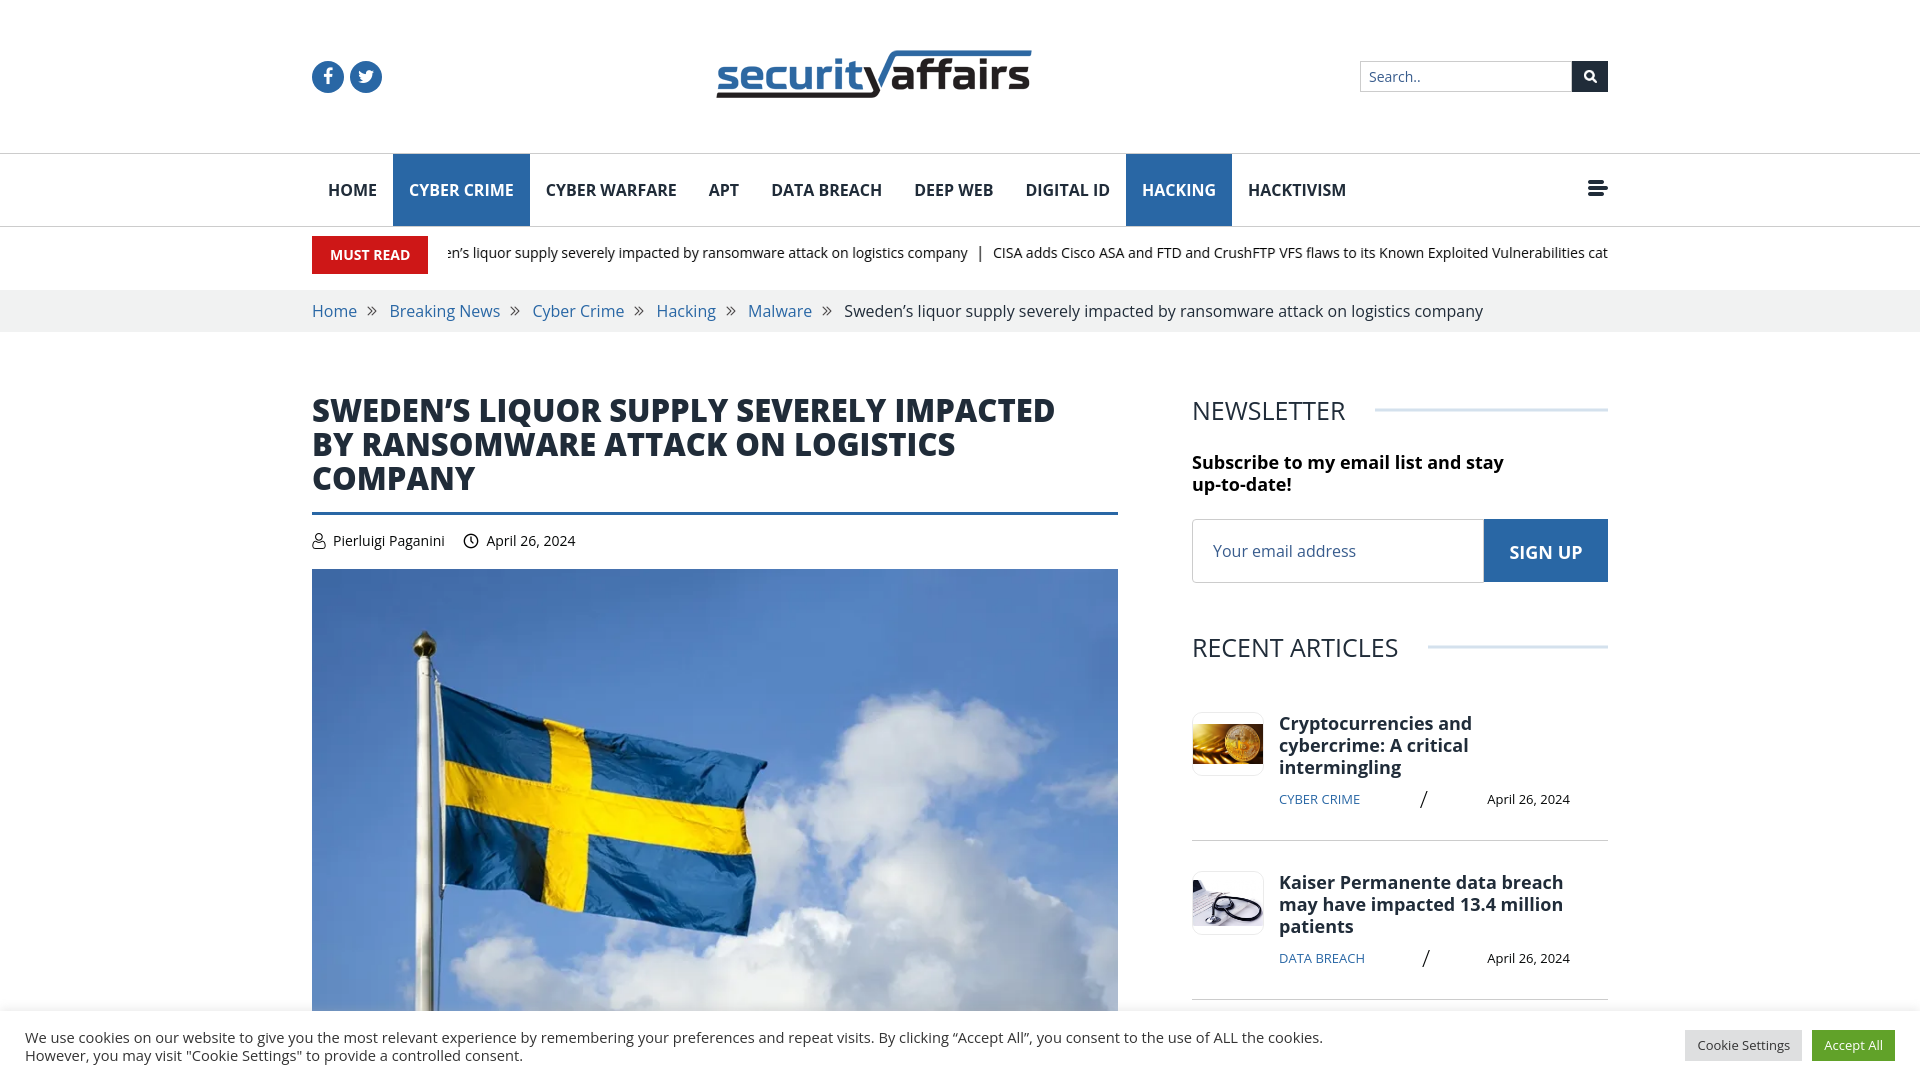 Sweden’s liquor supply severely impacted by ransomware attack